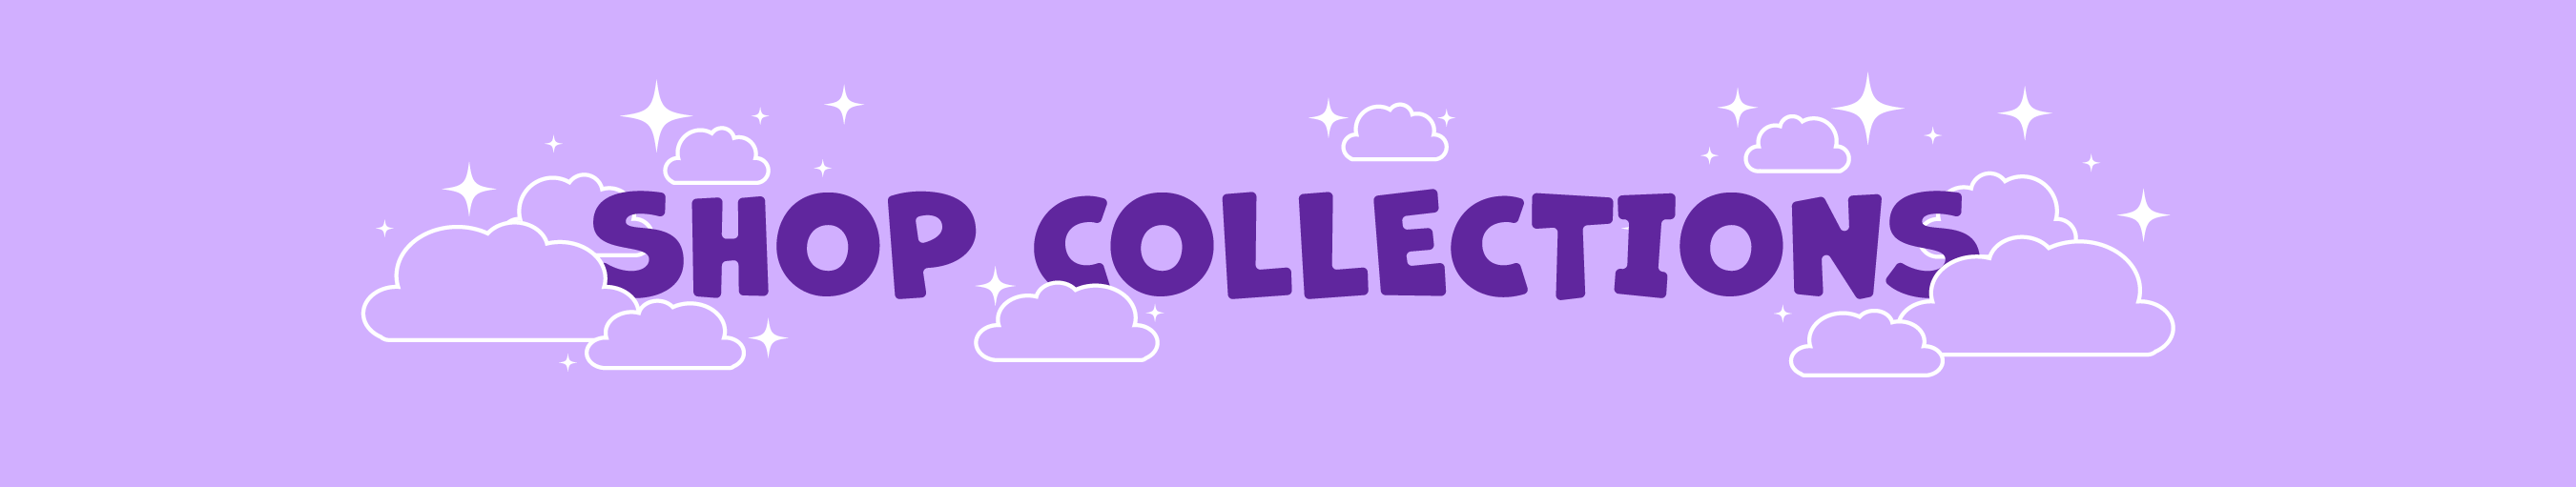 light purple background with white clouds and stars around purple text "shop collections" in all caps.